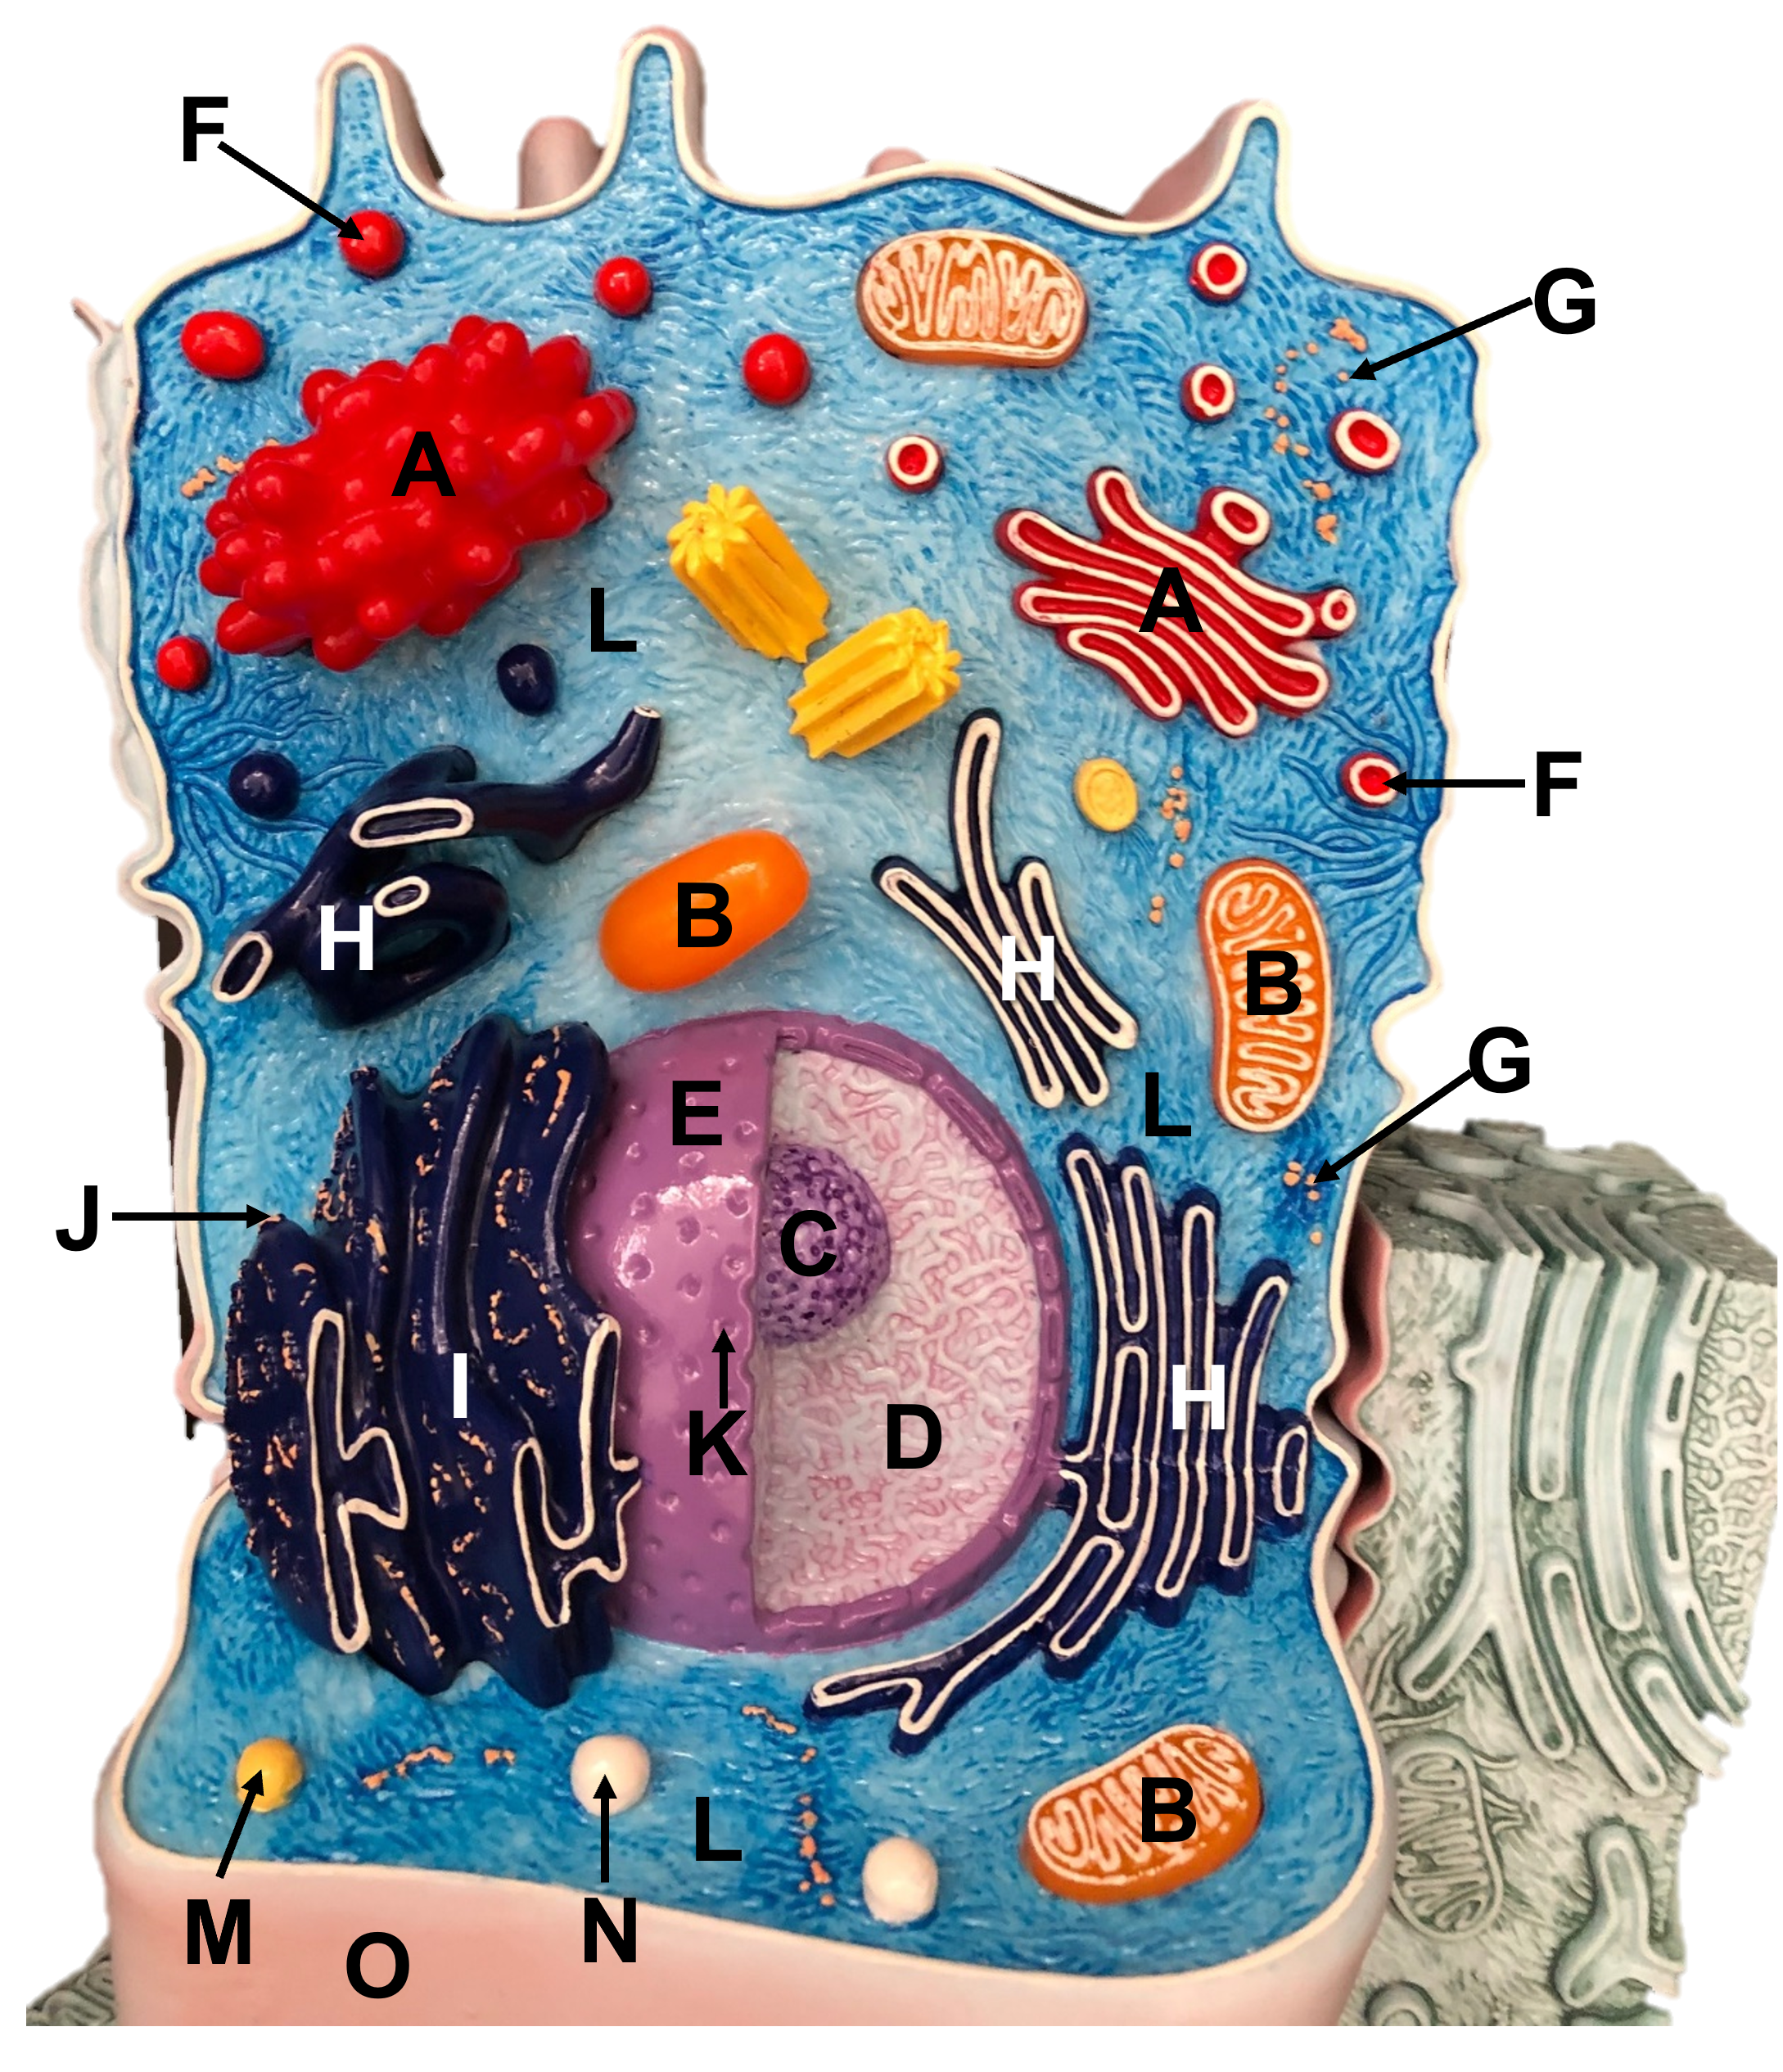 labeled eukaryotic cells